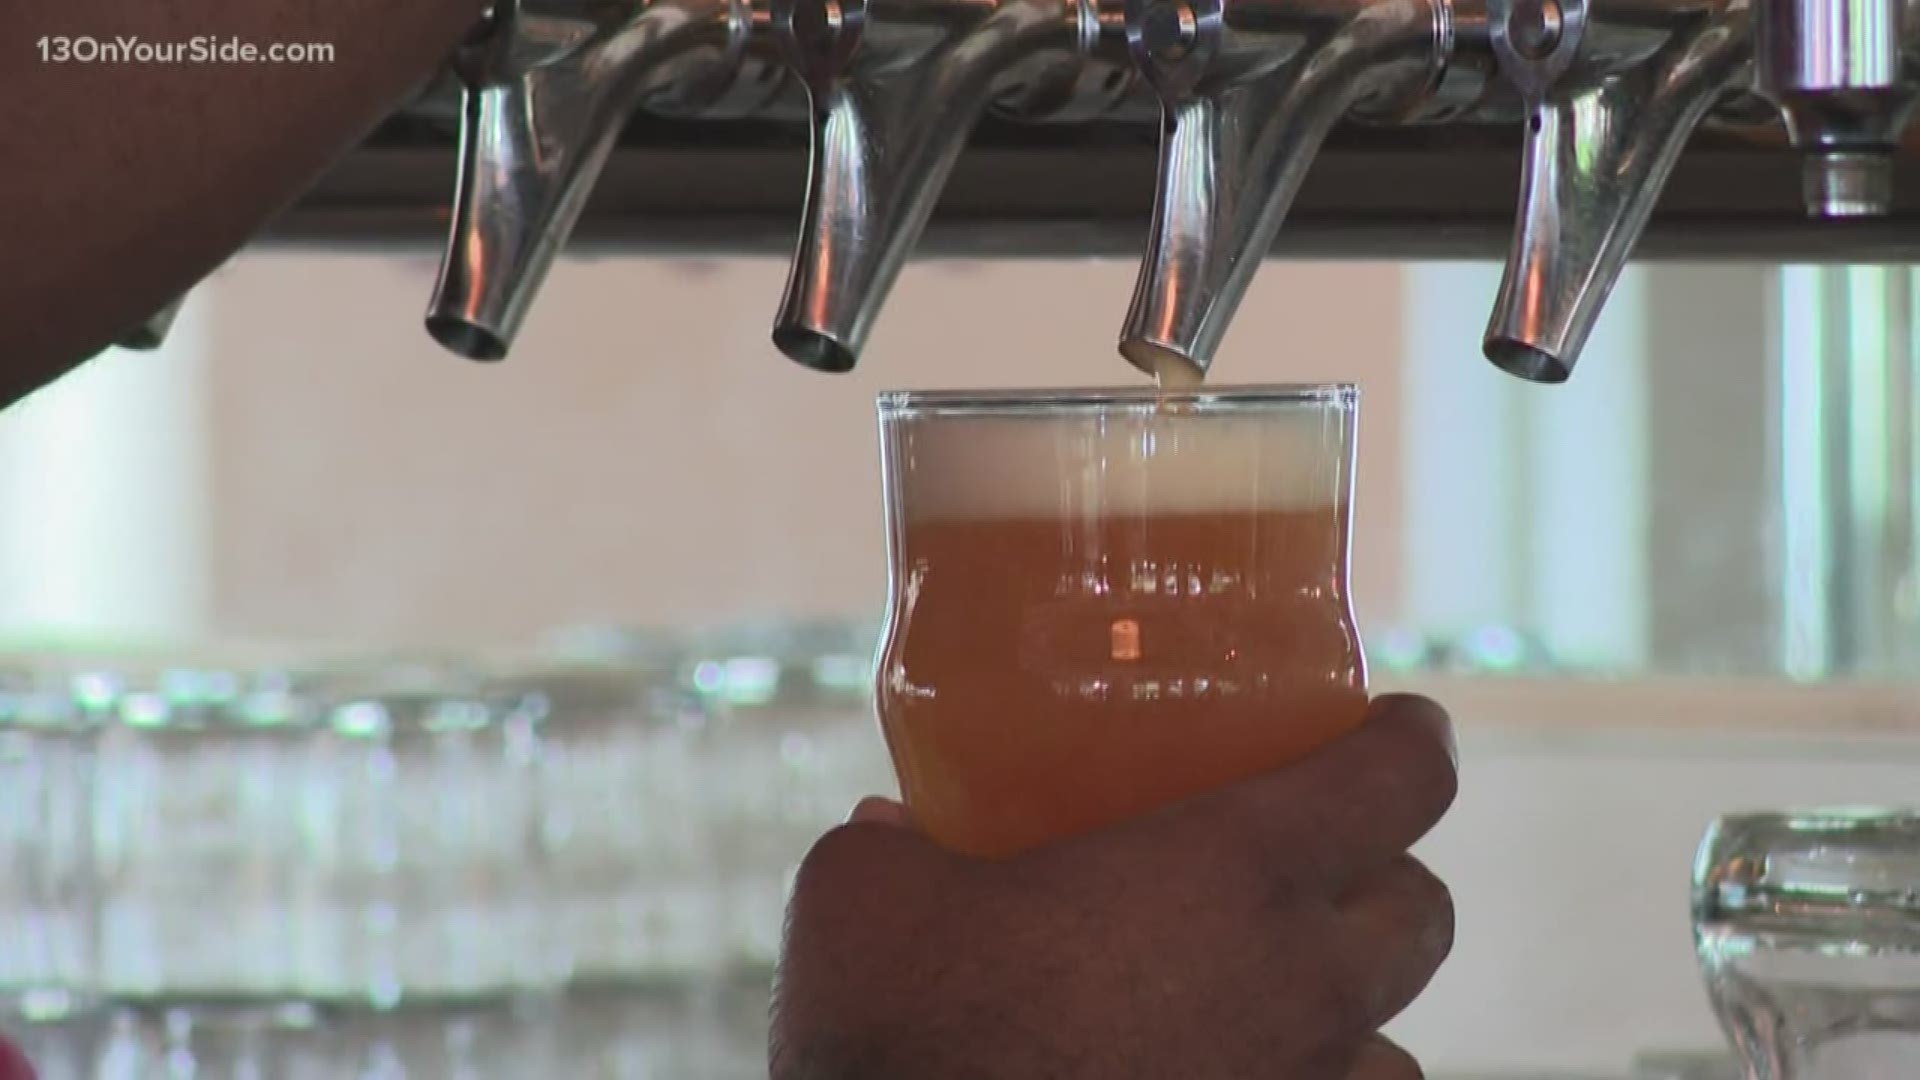 The tariffs are expected to impact the automotive, agriculture and craft beer industries, specifically the cost of equipment for craft brewers.